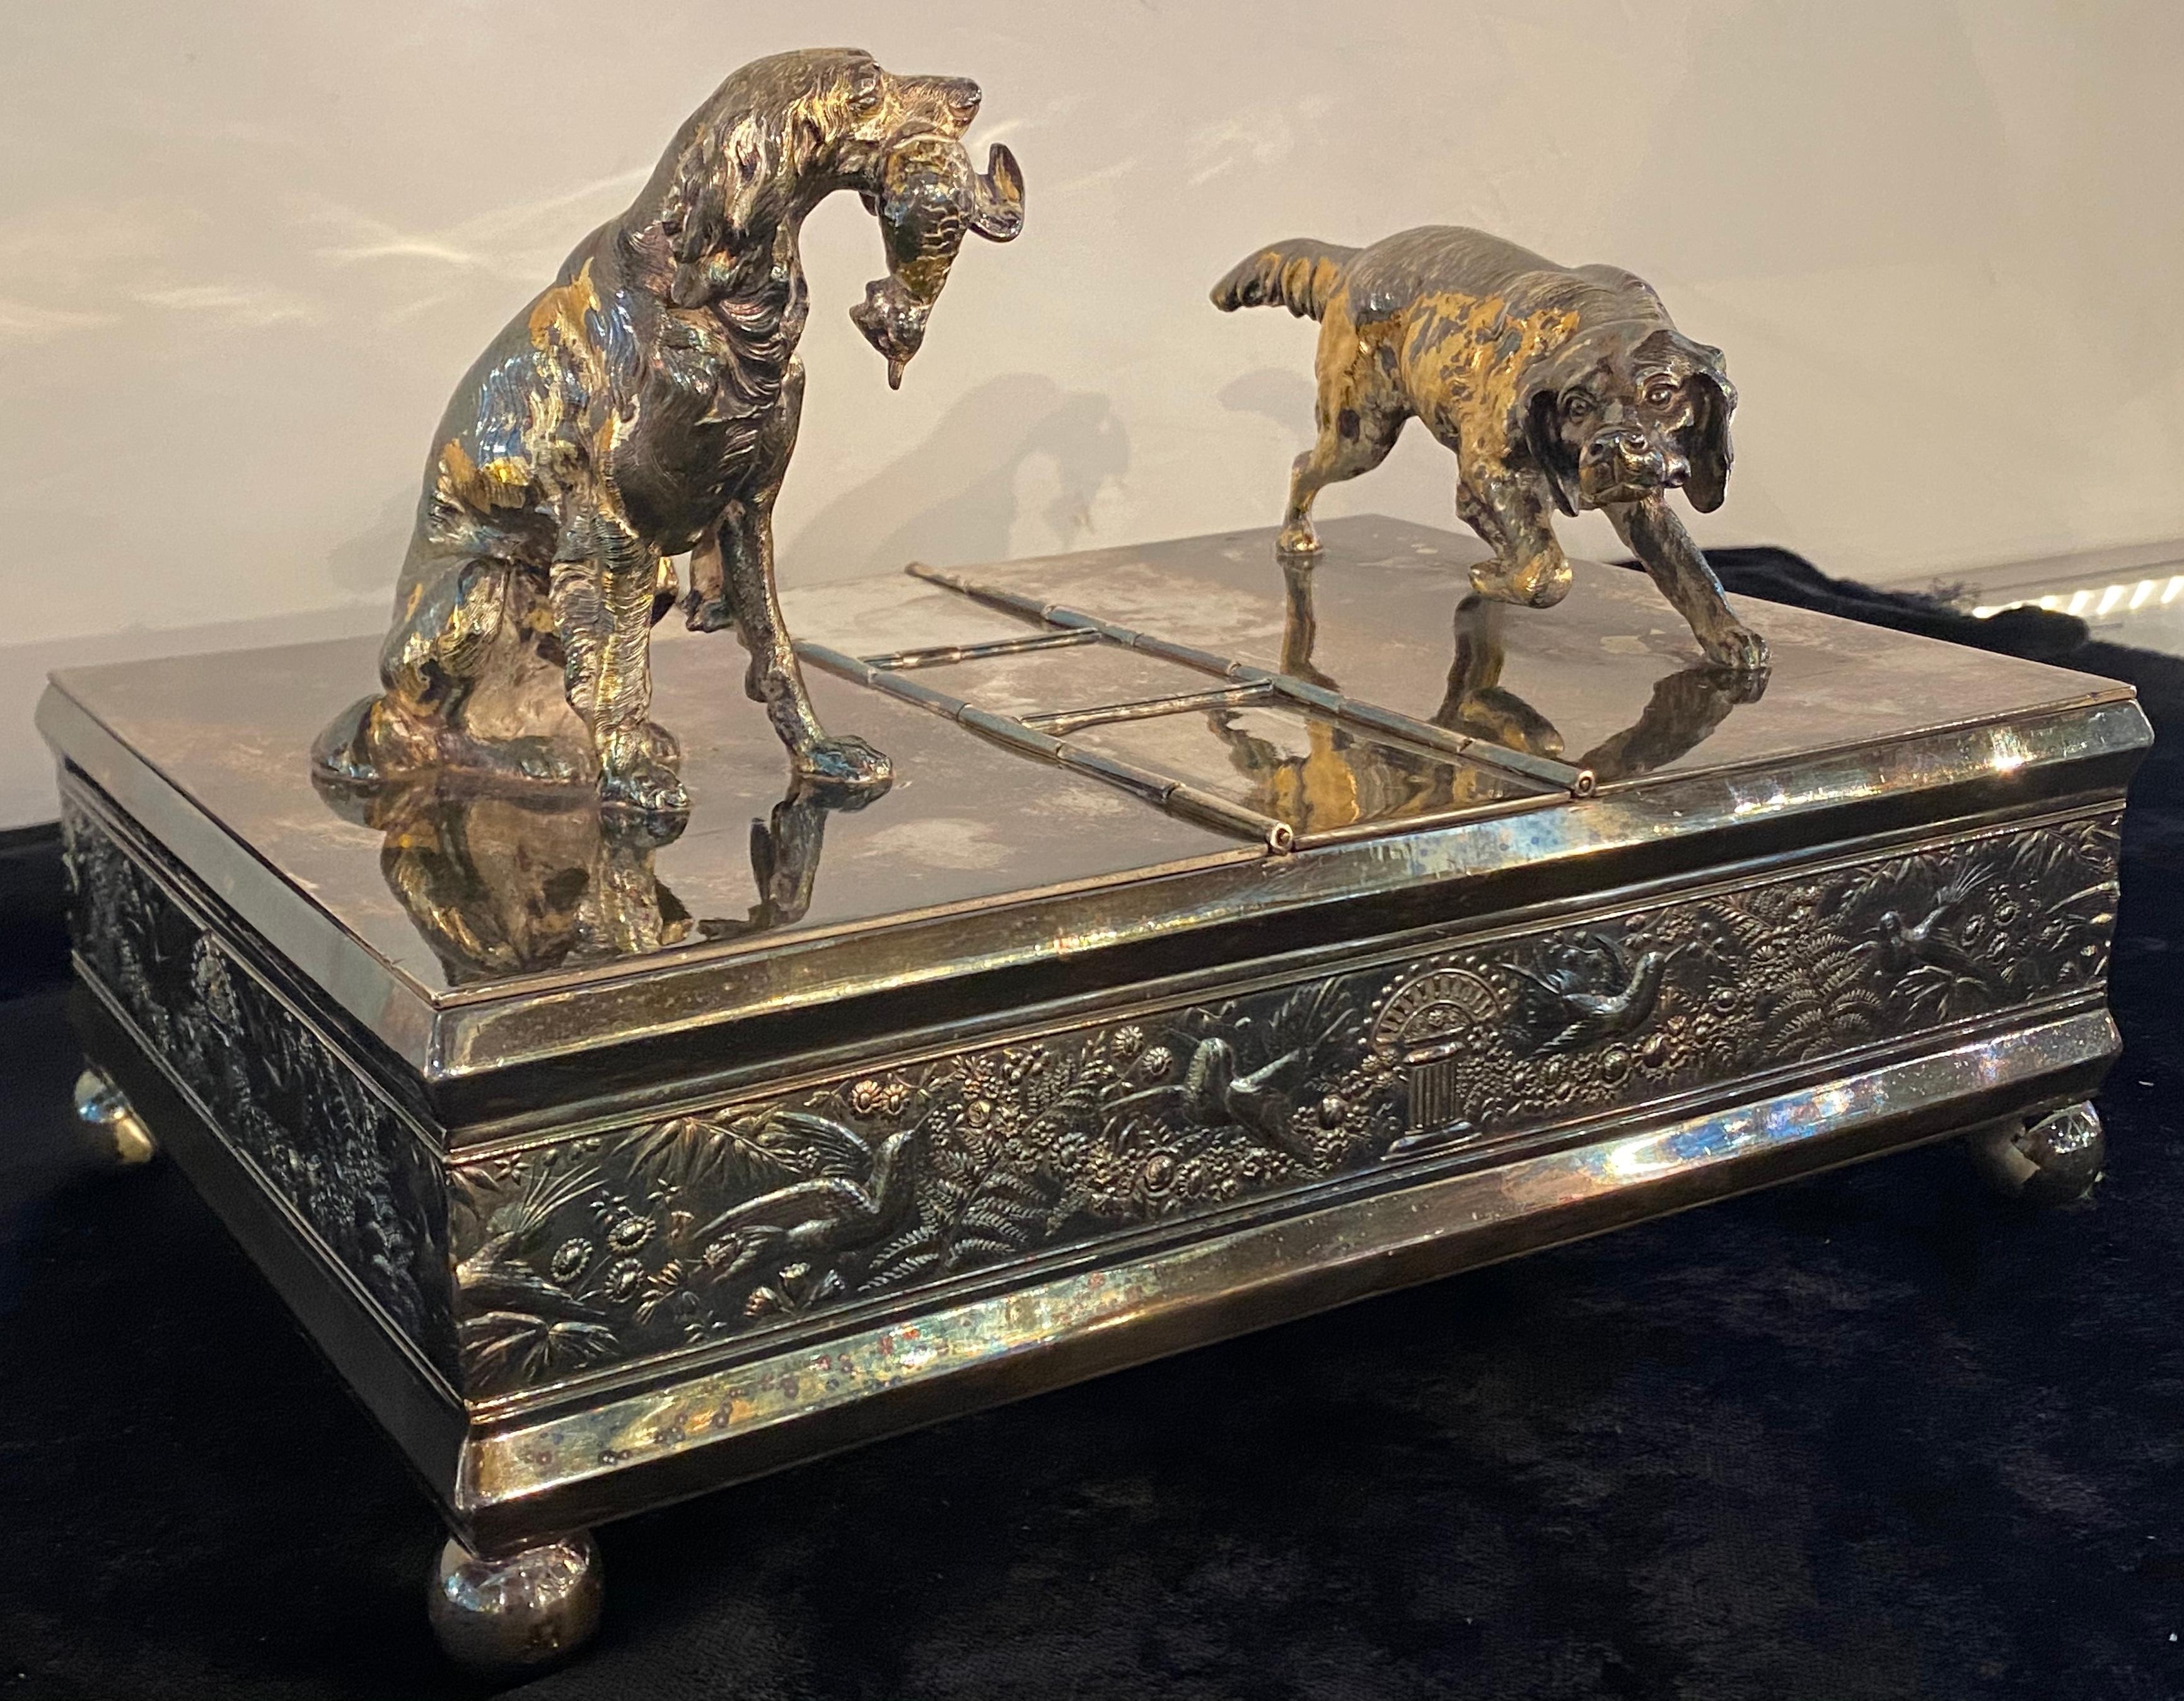 Hunting dog humidor for Cigars. Part of our extensive Cigar collection. By Meriden & Company (American (Connecticut), founded 1808). A quadruple silver plated humidor of rectangular form having two figural hunting dogs on lids as handles. With two